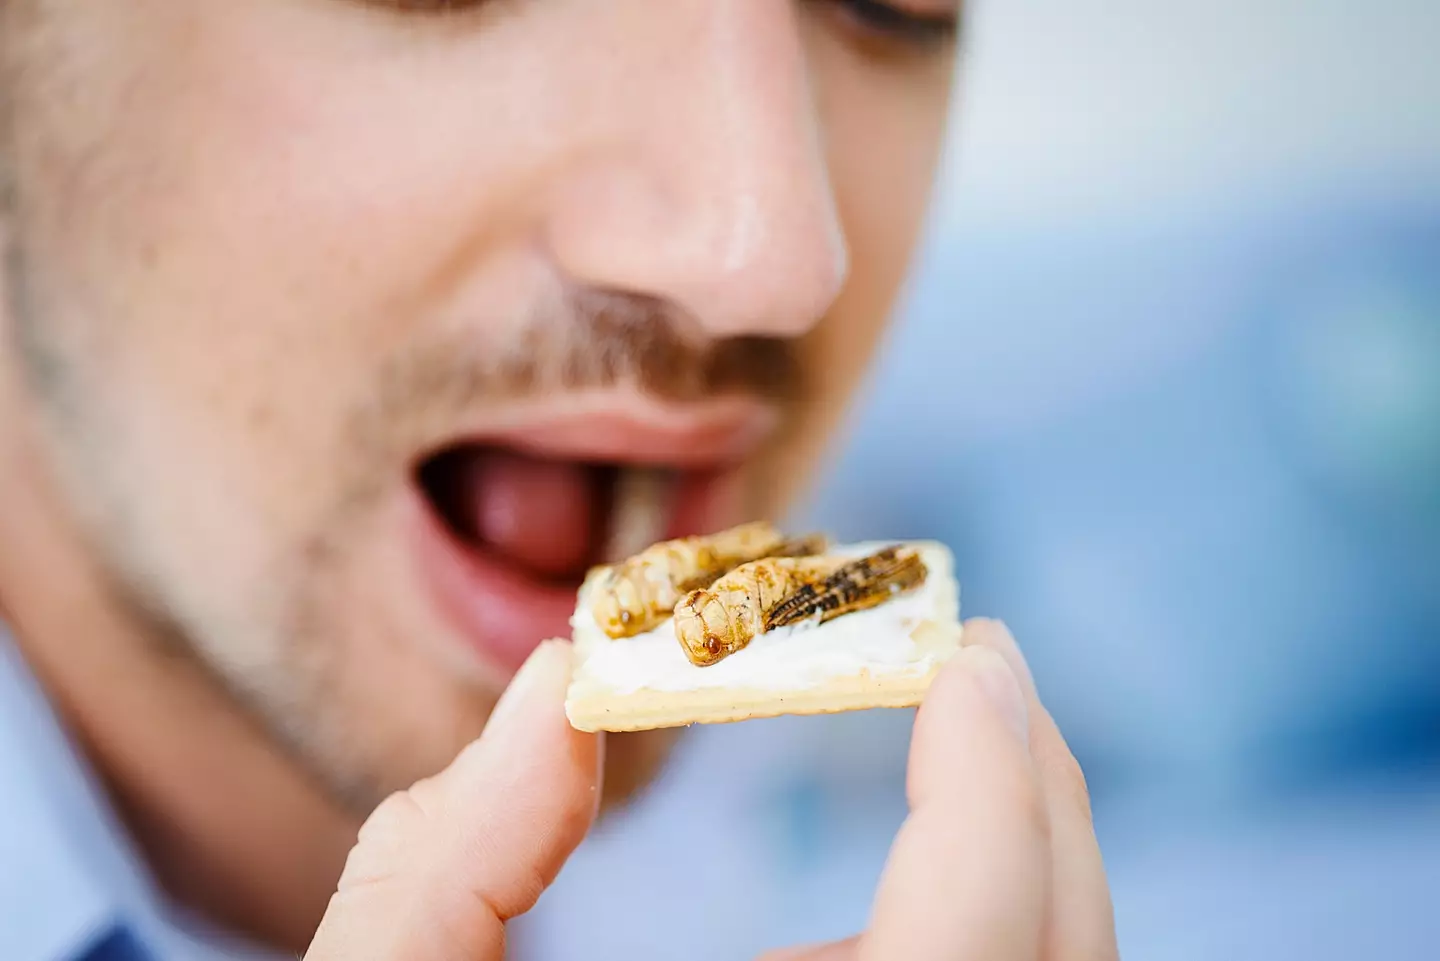 Eating insects hasn't exactly reached the mainstream.